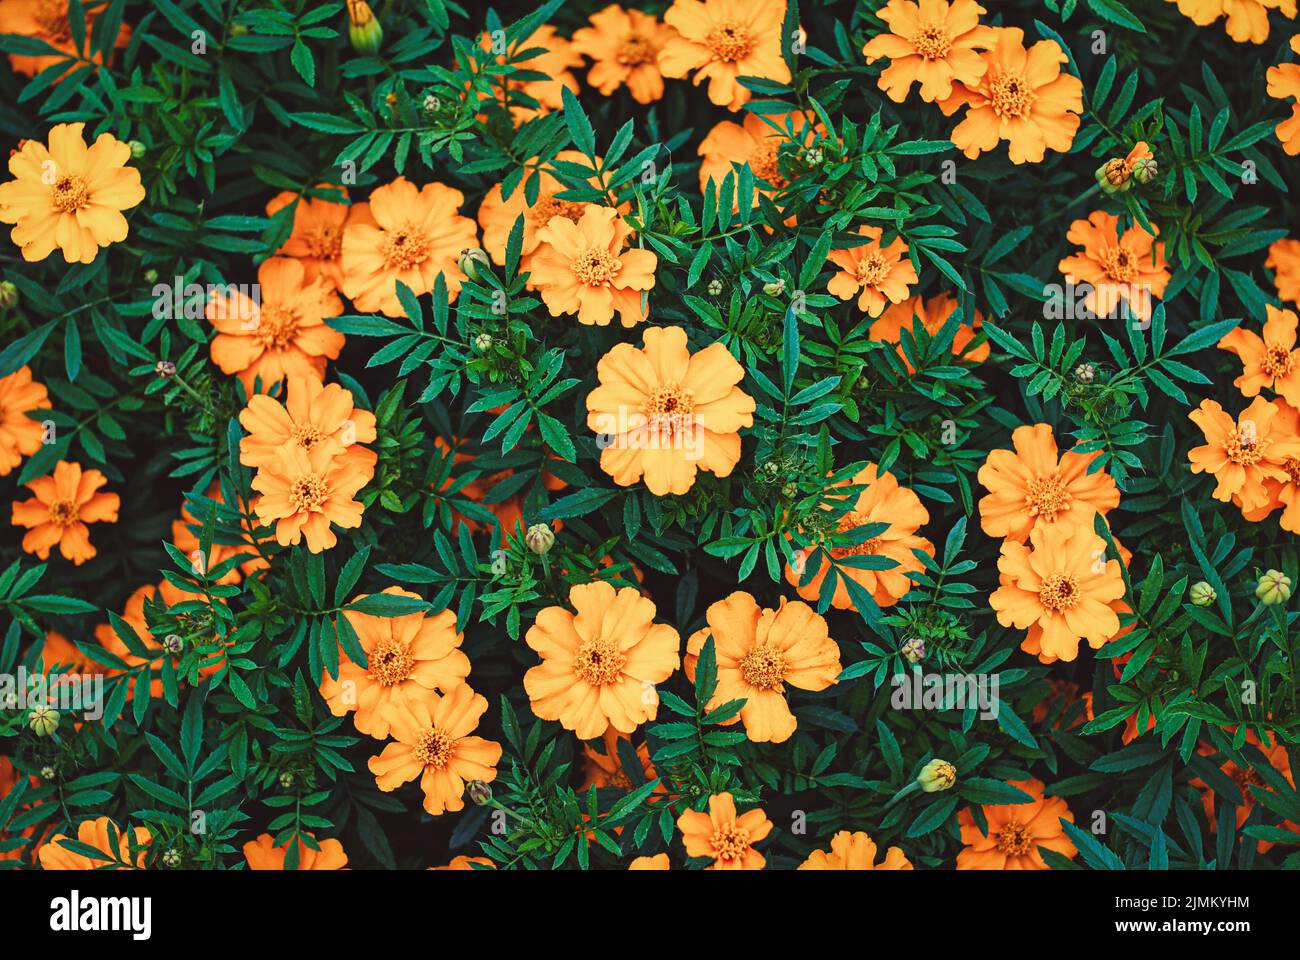 French marigolds flowering in the garden, natural floral background, overhead shot Stock Photo